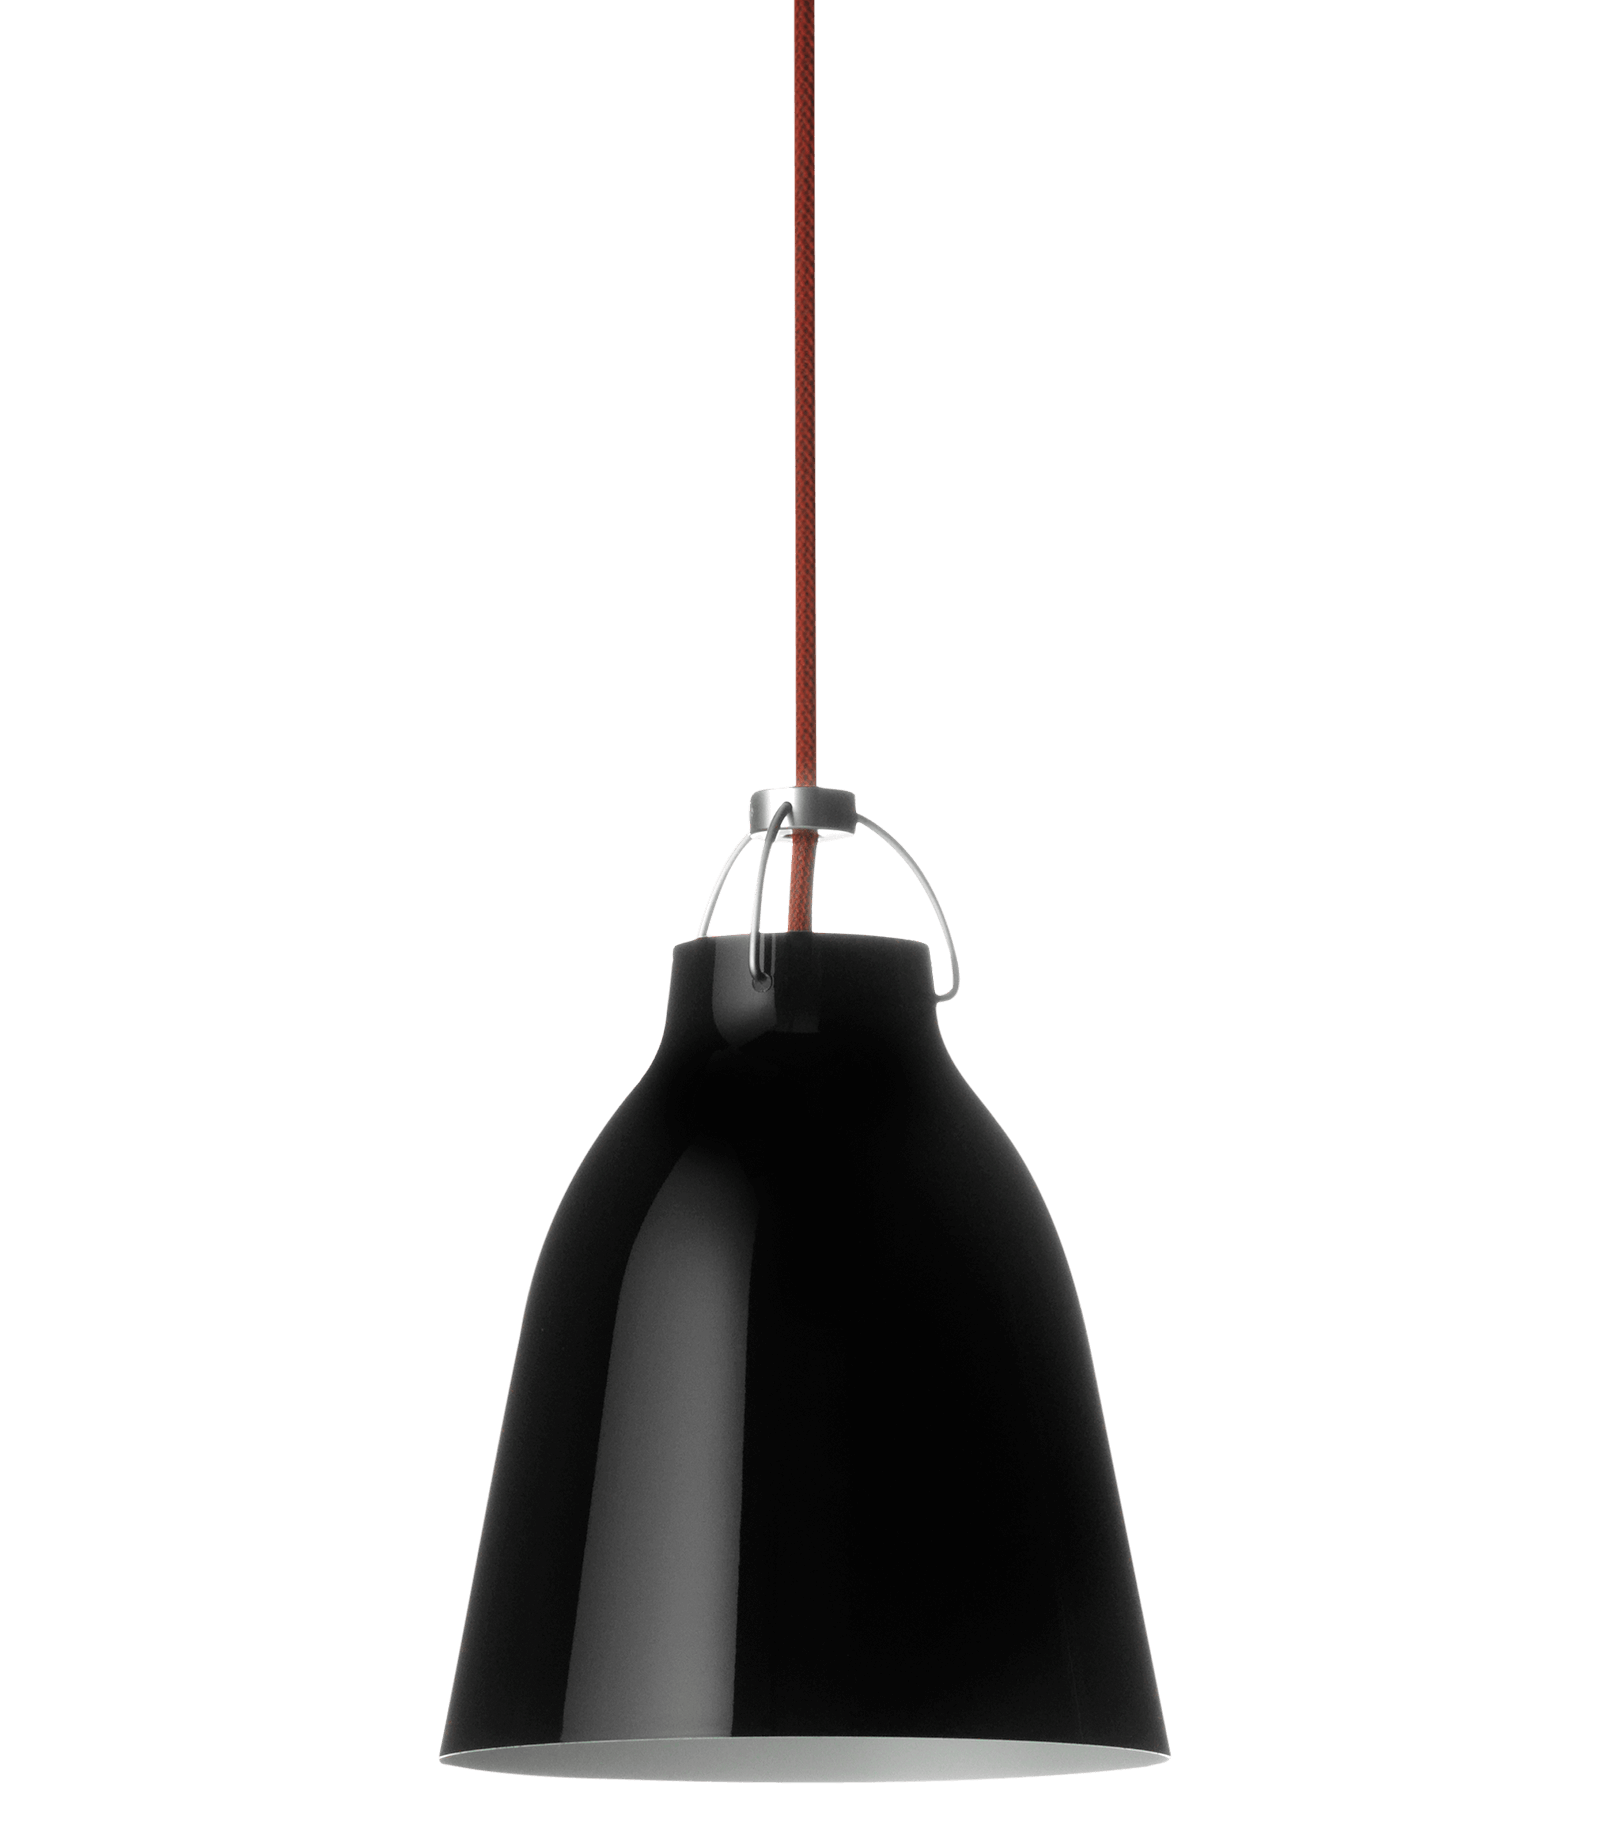 Caravaggio™ - Lamps a timeless silhouette Fritz